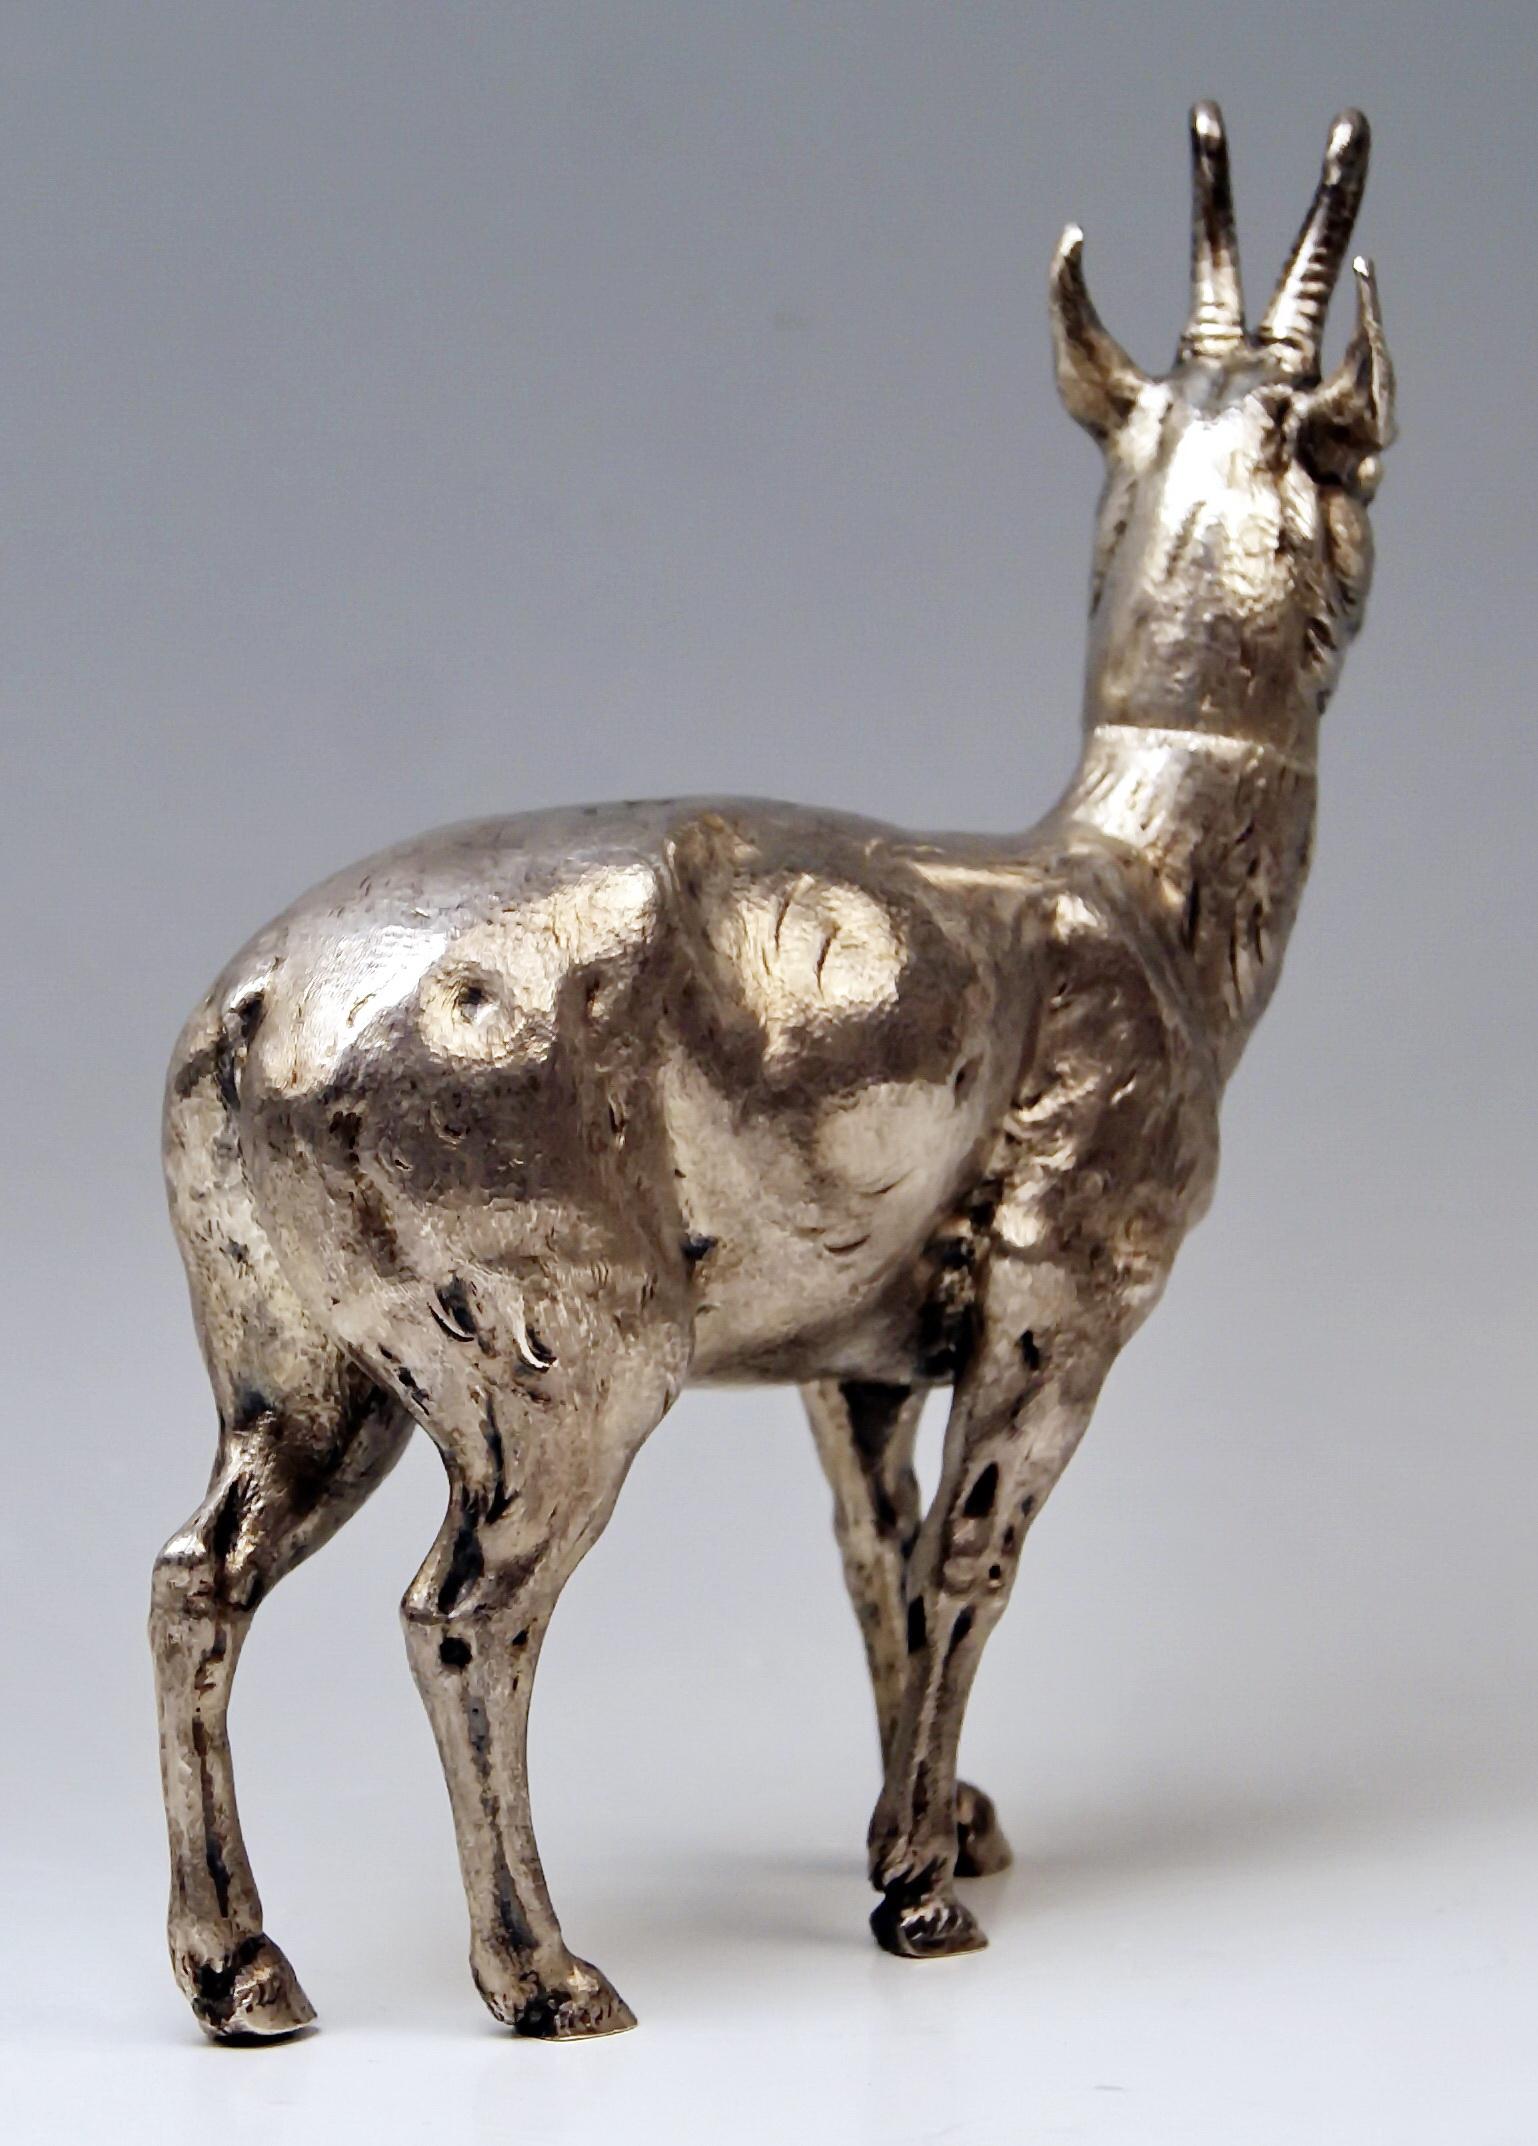 Gorgeous animal figurine made of silver 800: Chamois.
Made in Germany / Hanau 1880-1885
Specifications:
Lifelike animal's figurine depicting a chamois / the animal's head is removable. The details are stunningly worked so that this lifelike